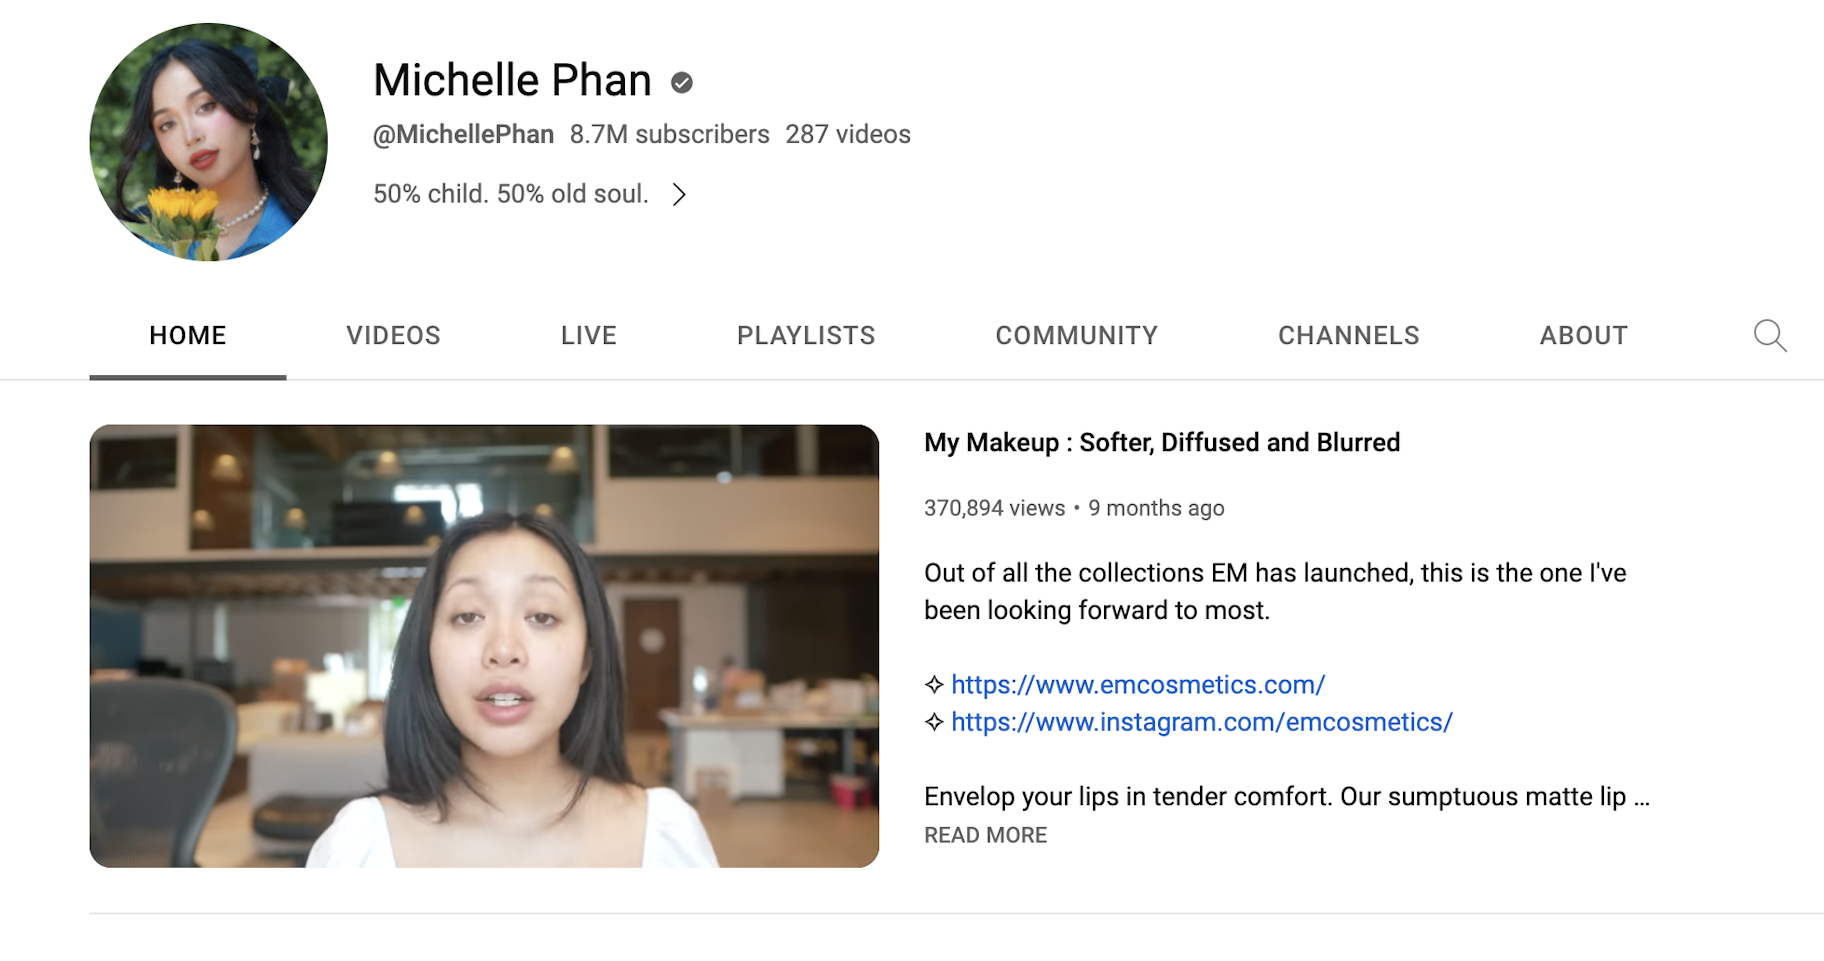 Michelle Phan personal brand